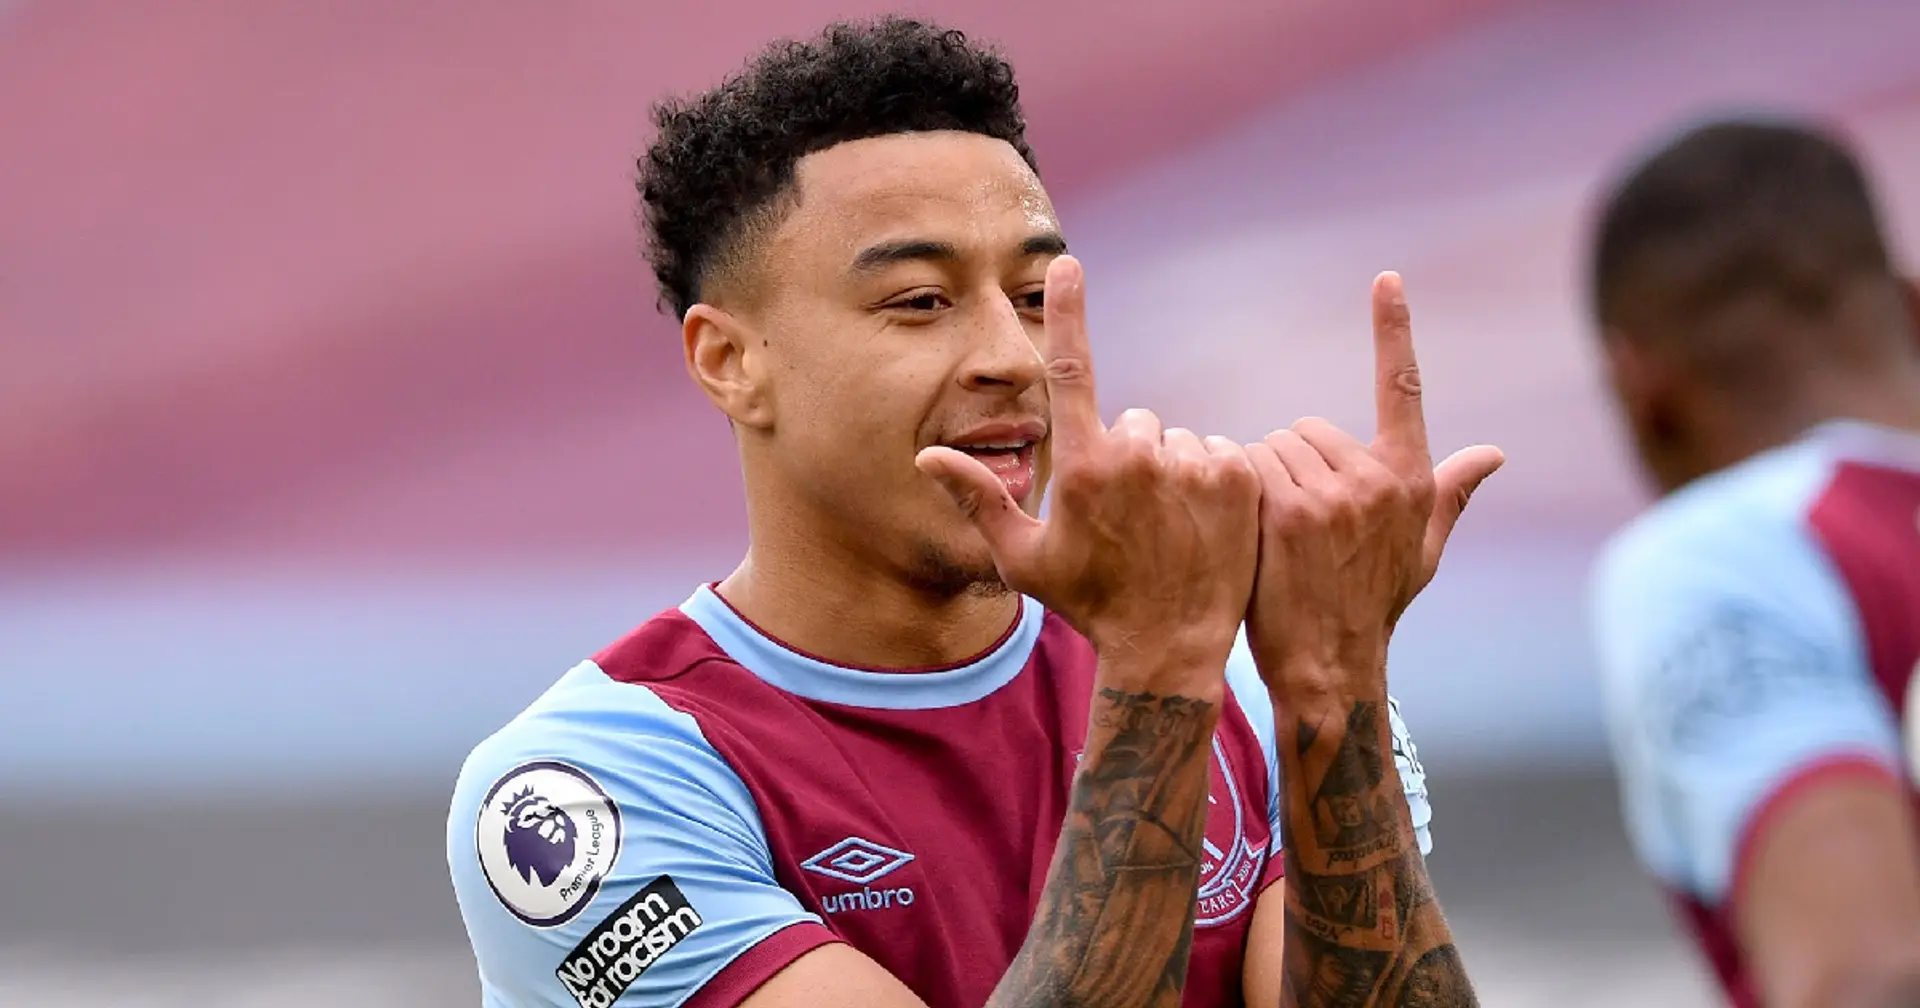 Analysed: Why Jesse Lingard performs better at West Ham than Man United